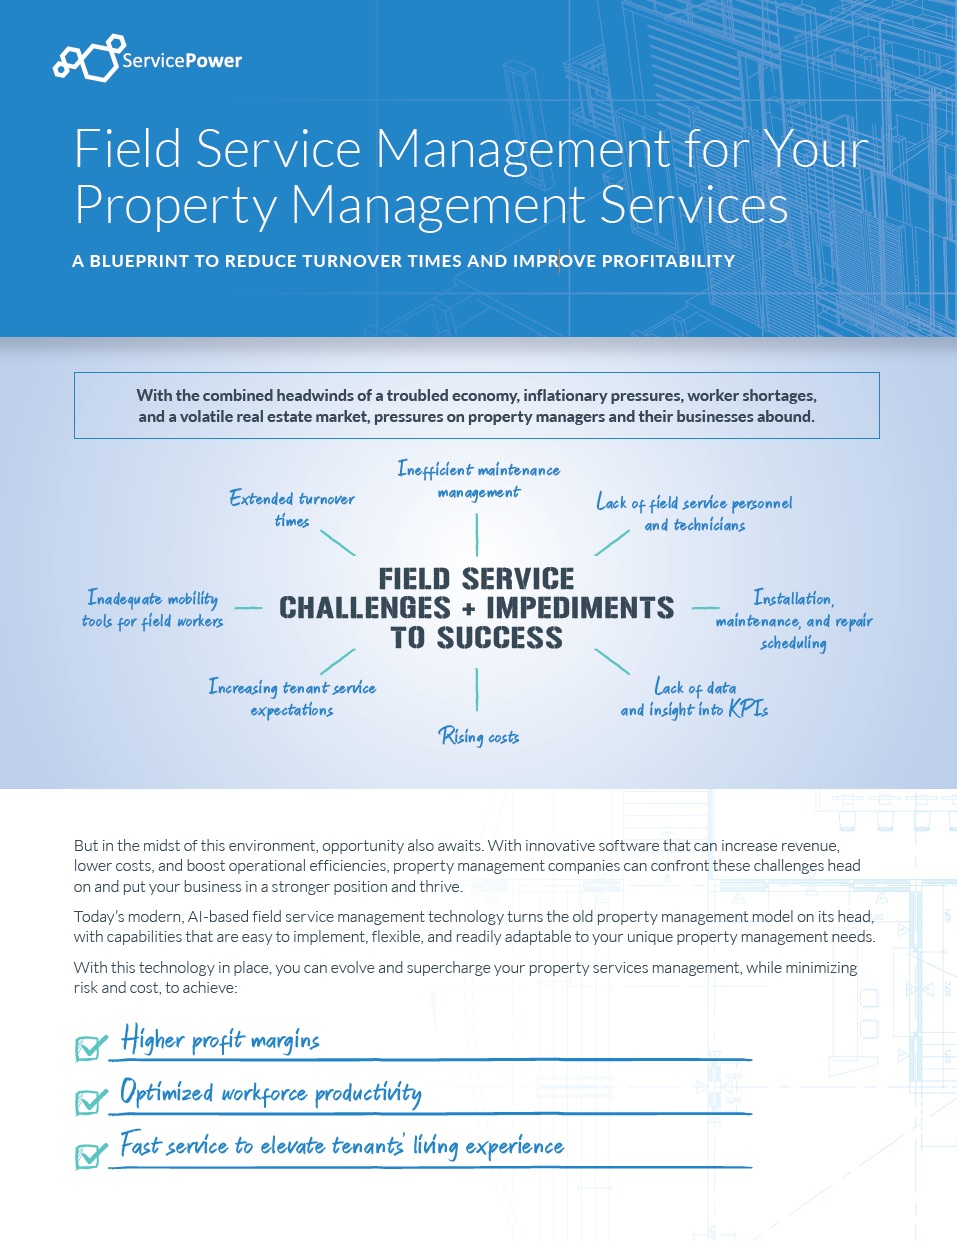 Field Service Management for Your Property Management Services ServicePower